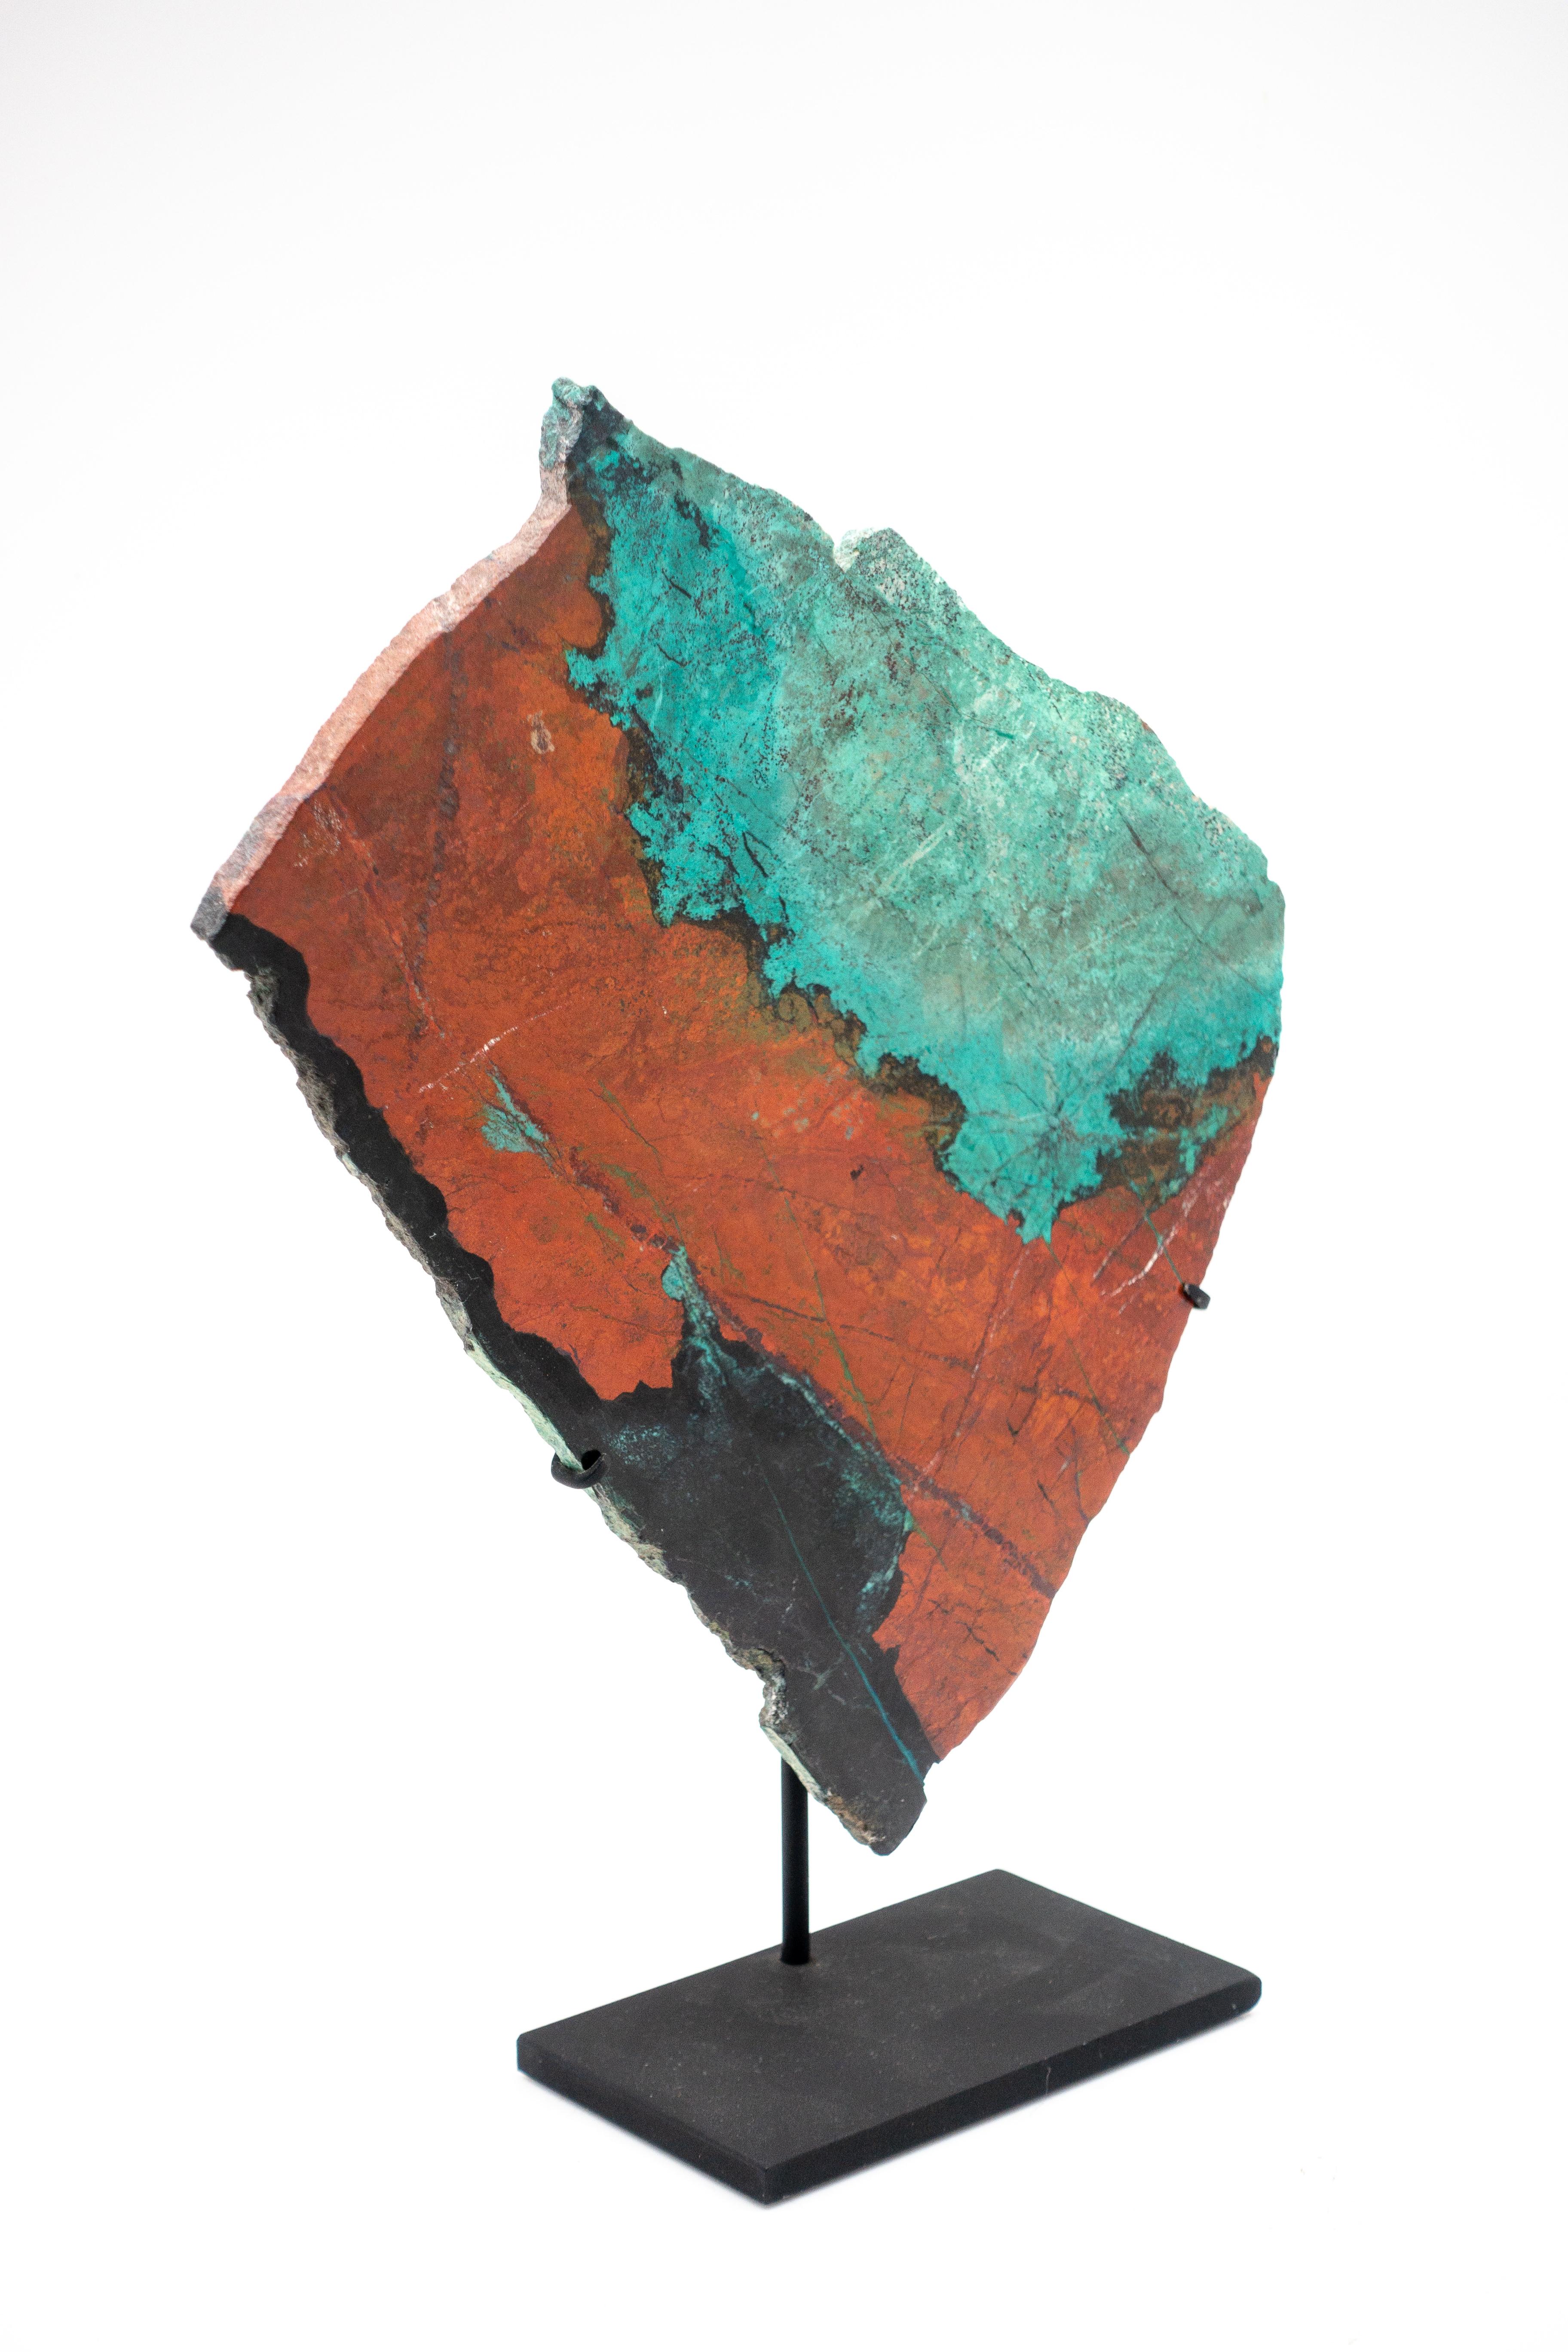 Large mounted green and red cuprite chrysocolla specimen AKA Sonora sunset or Sonora sunrise. It is named for the colorful sunsets over the Sonoran Desert, where these specimens were mined.